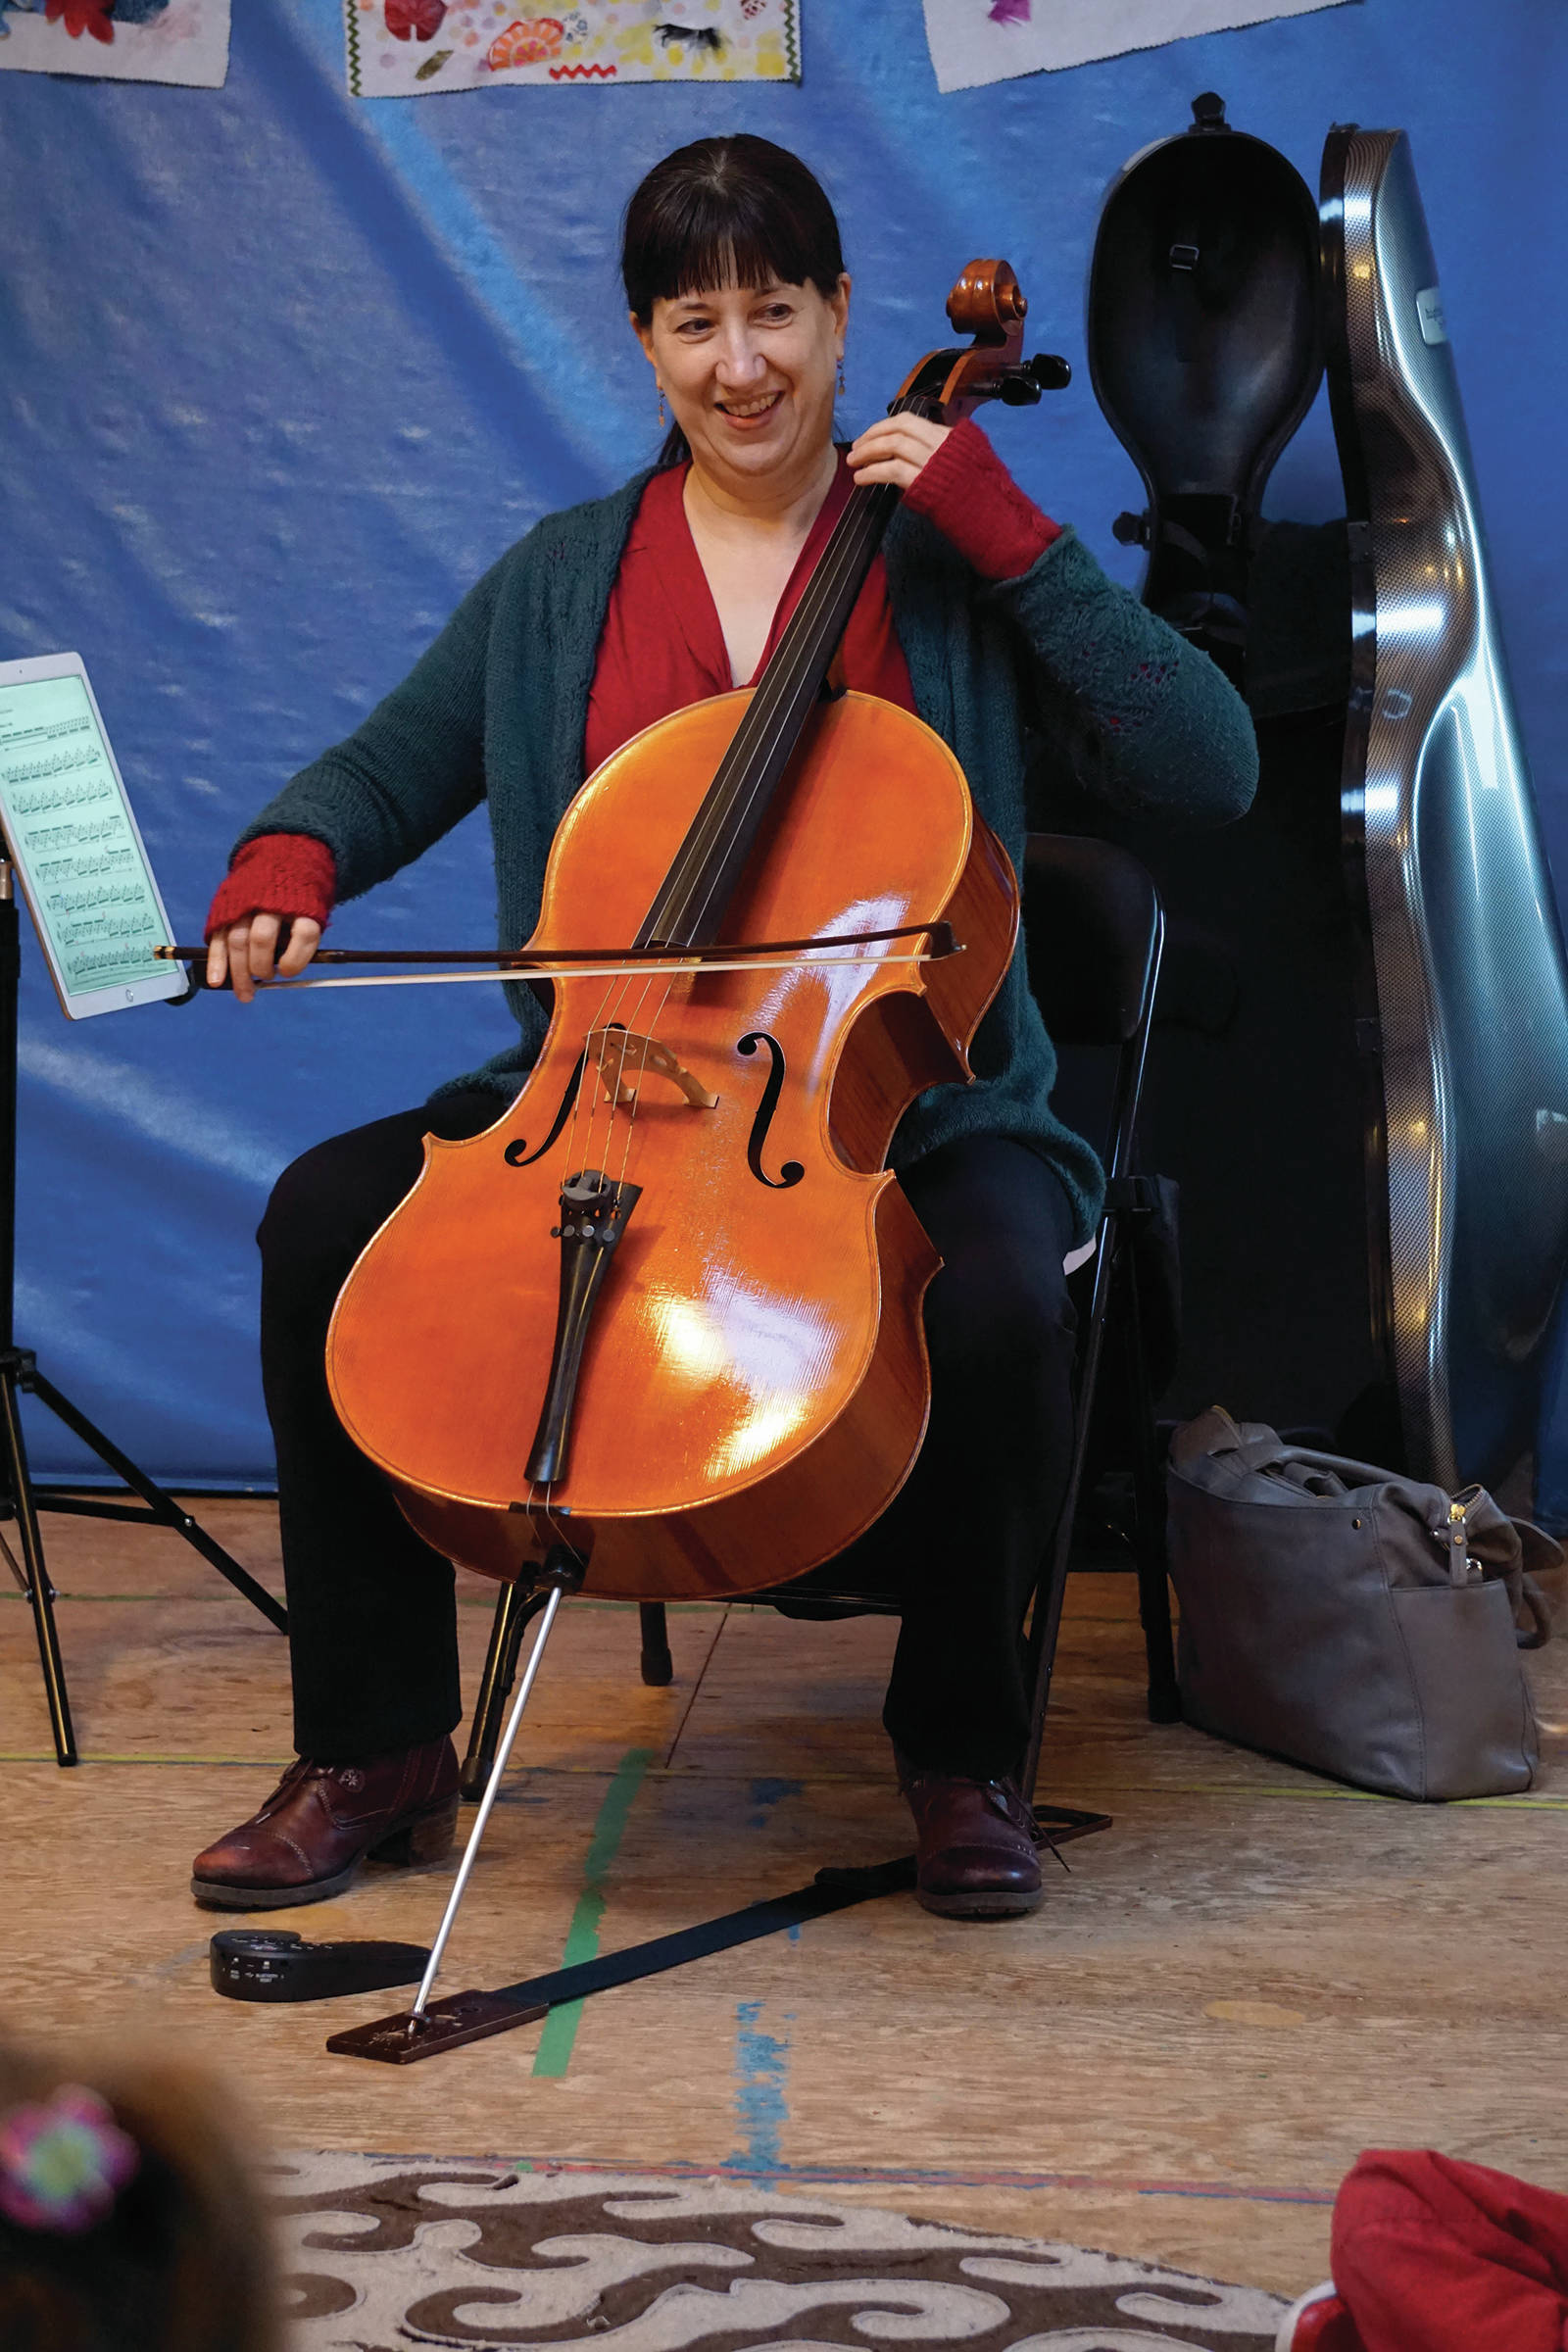 Nancy L. Ives, principal cellist for the Oregon Symphony Orchestra, Portland, plays for students at Little Fireweed Academy on Friday, Dec. 20, 2019, in Homer, Alaska. Ives talked with the students about cycles, a theme they have been studying this year, and how they fit in music. She also performed for a concert fundraiser at the Pratt Museum that night. (Photo by Michael Armstrong/Homer News)